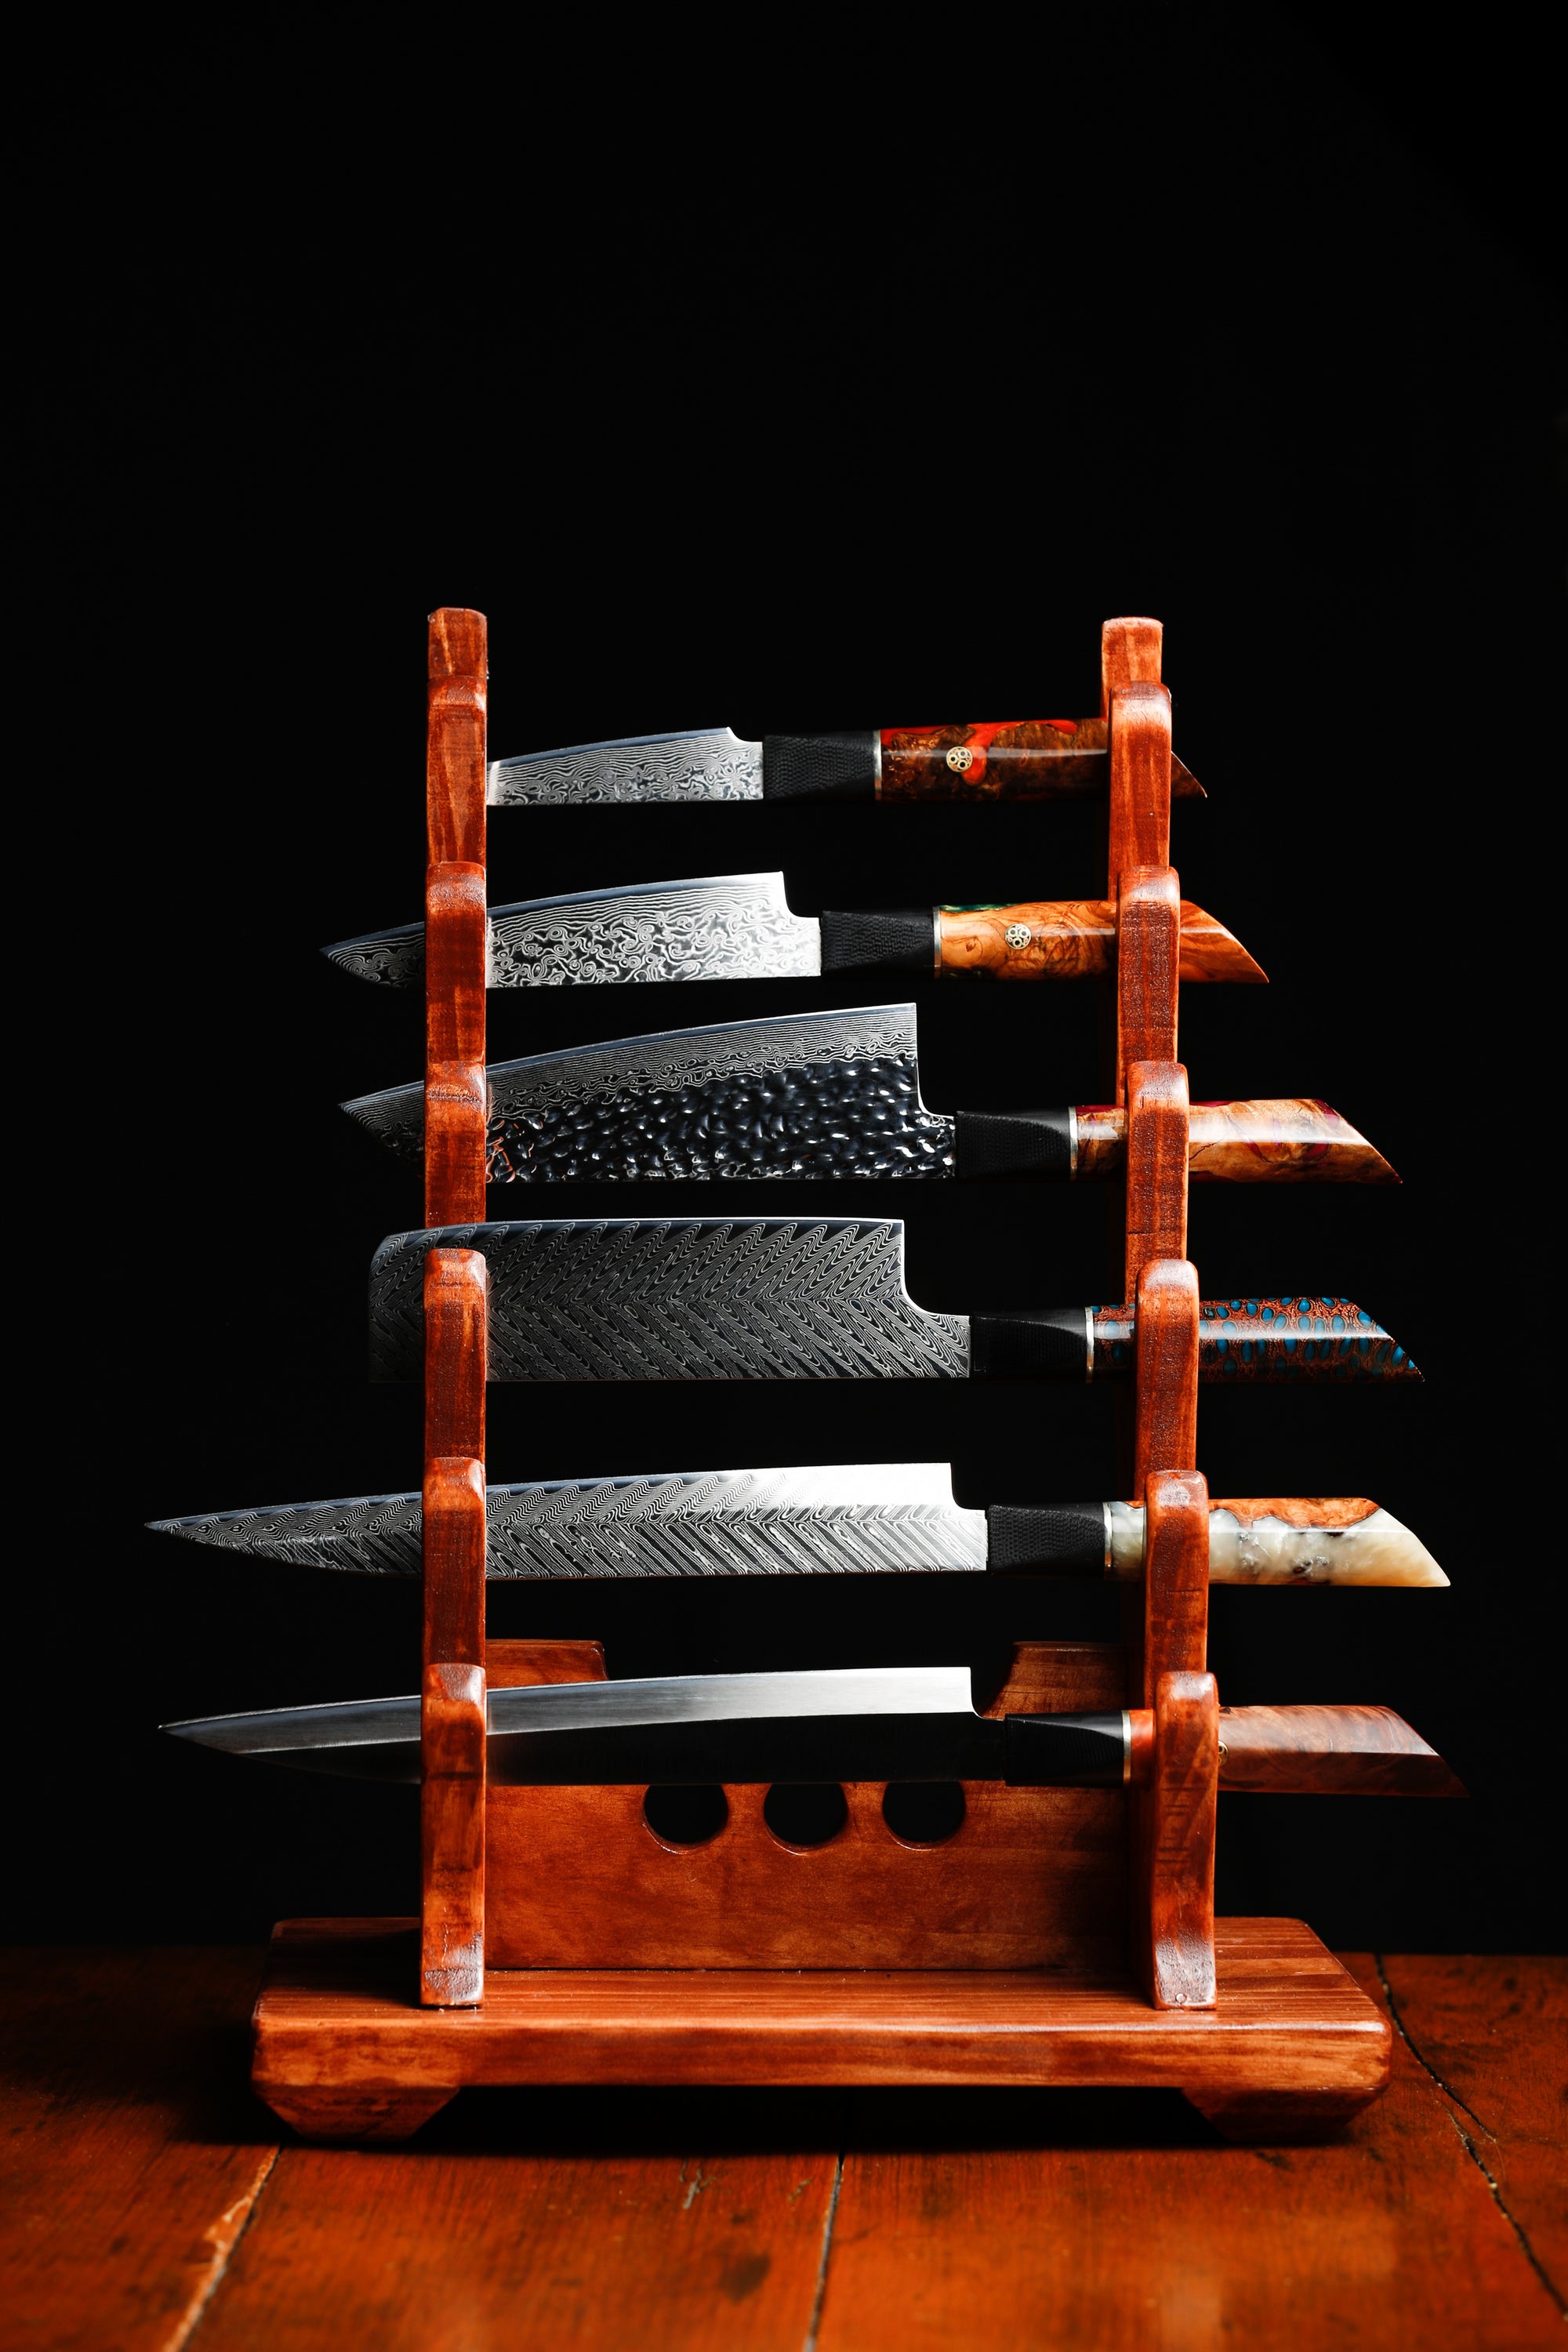 What are the "Top 8 Japanese Knives?"